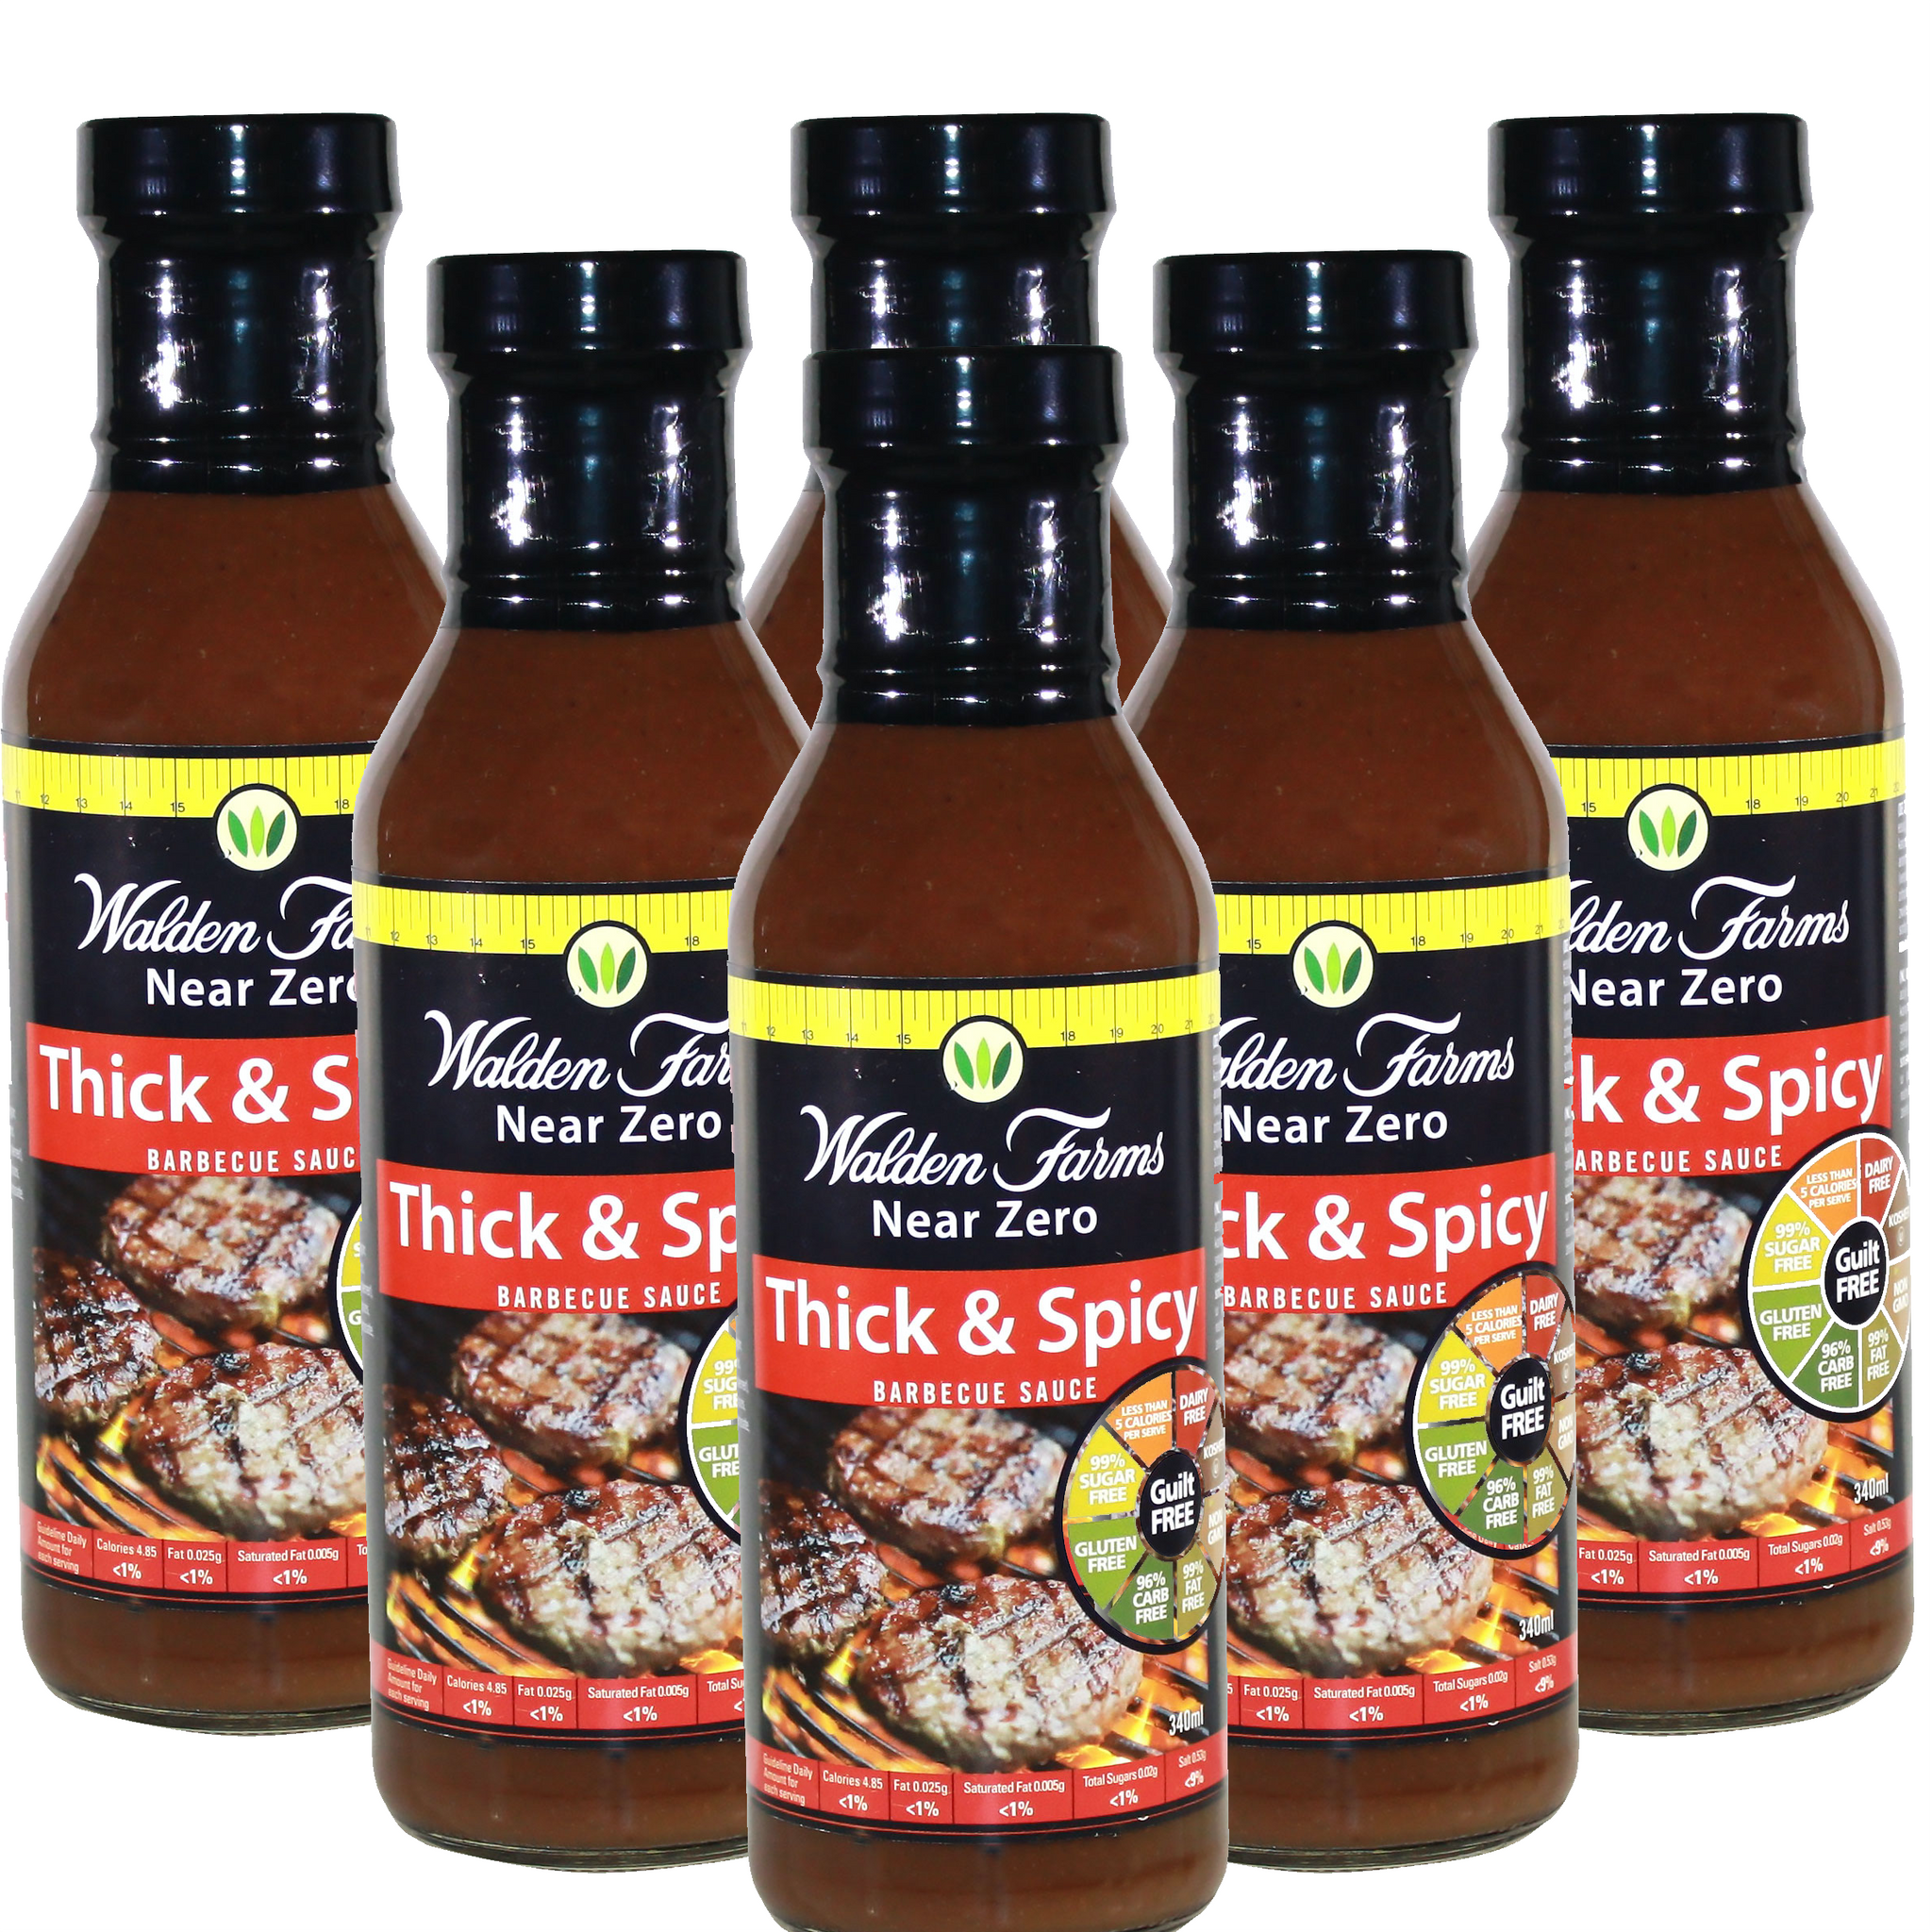 Gluten Free Thick 'n' Spicy Barbecue Sauce